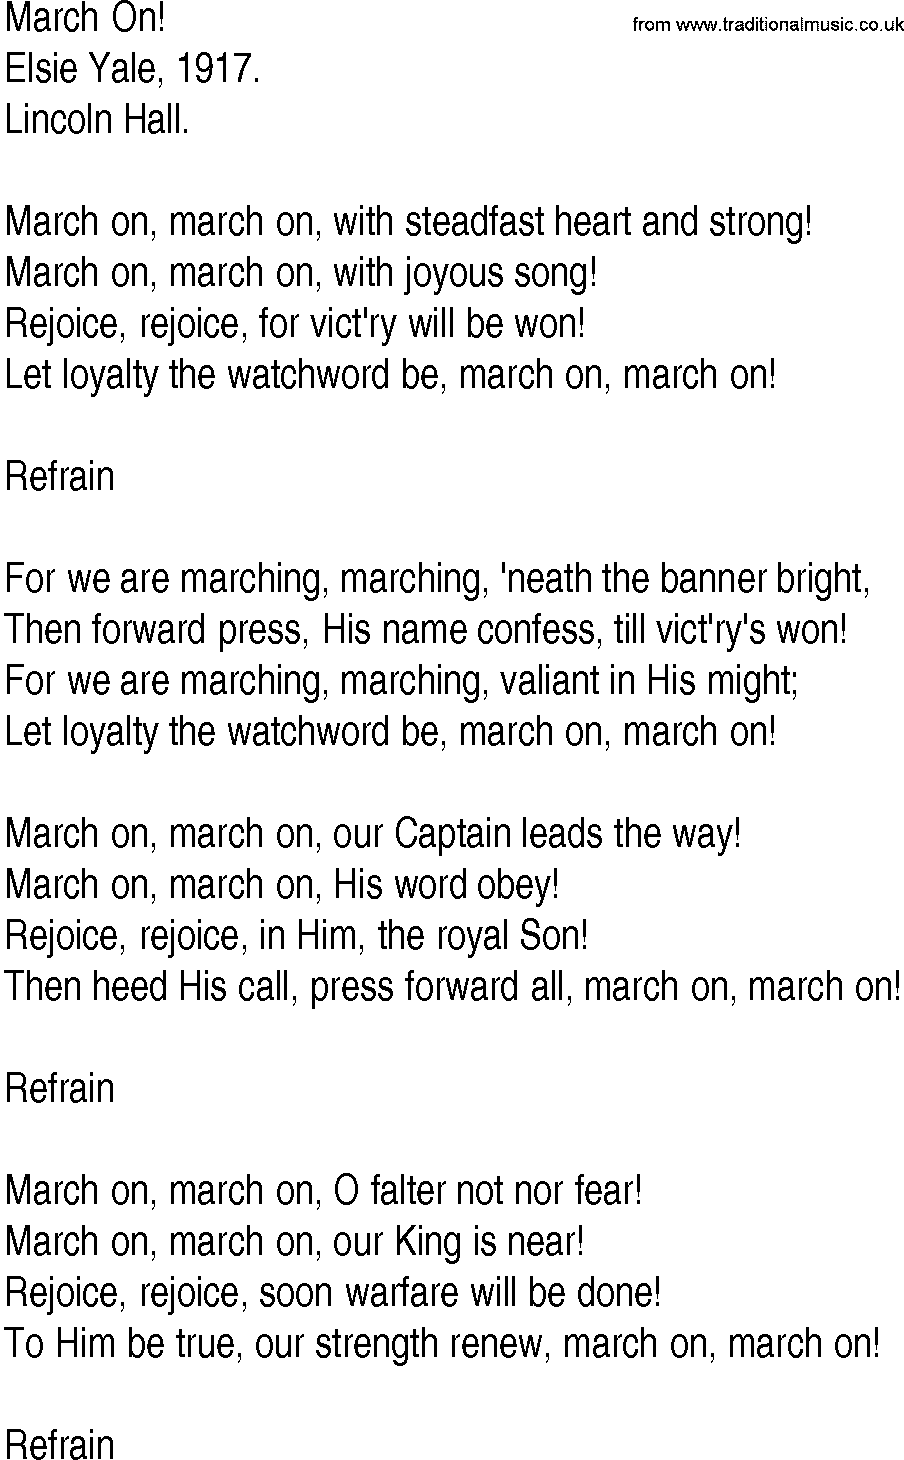 Hymn and Gospel Song: March On! by Elsie Yale lyrics